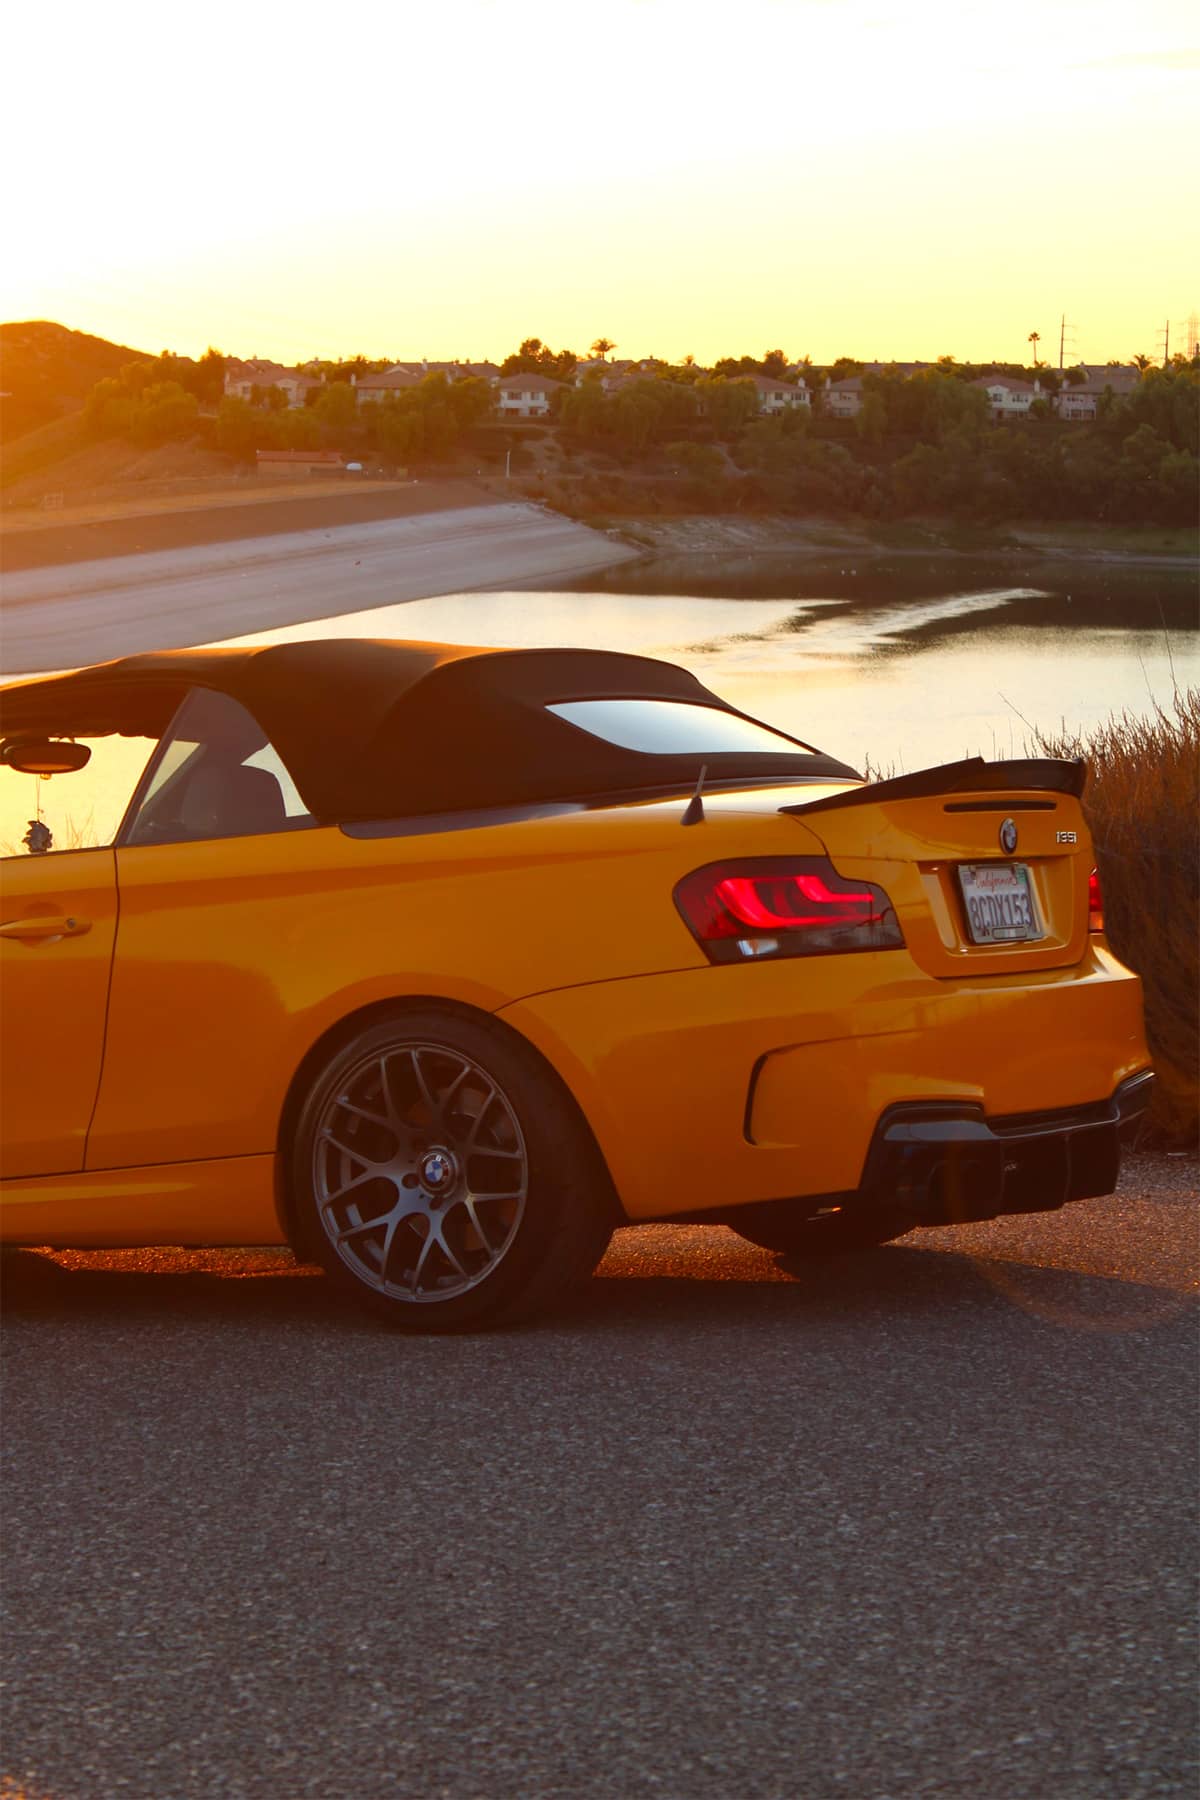 Modified BMW 135i 1-series convertible soft top and carbon fiber rear diffuser